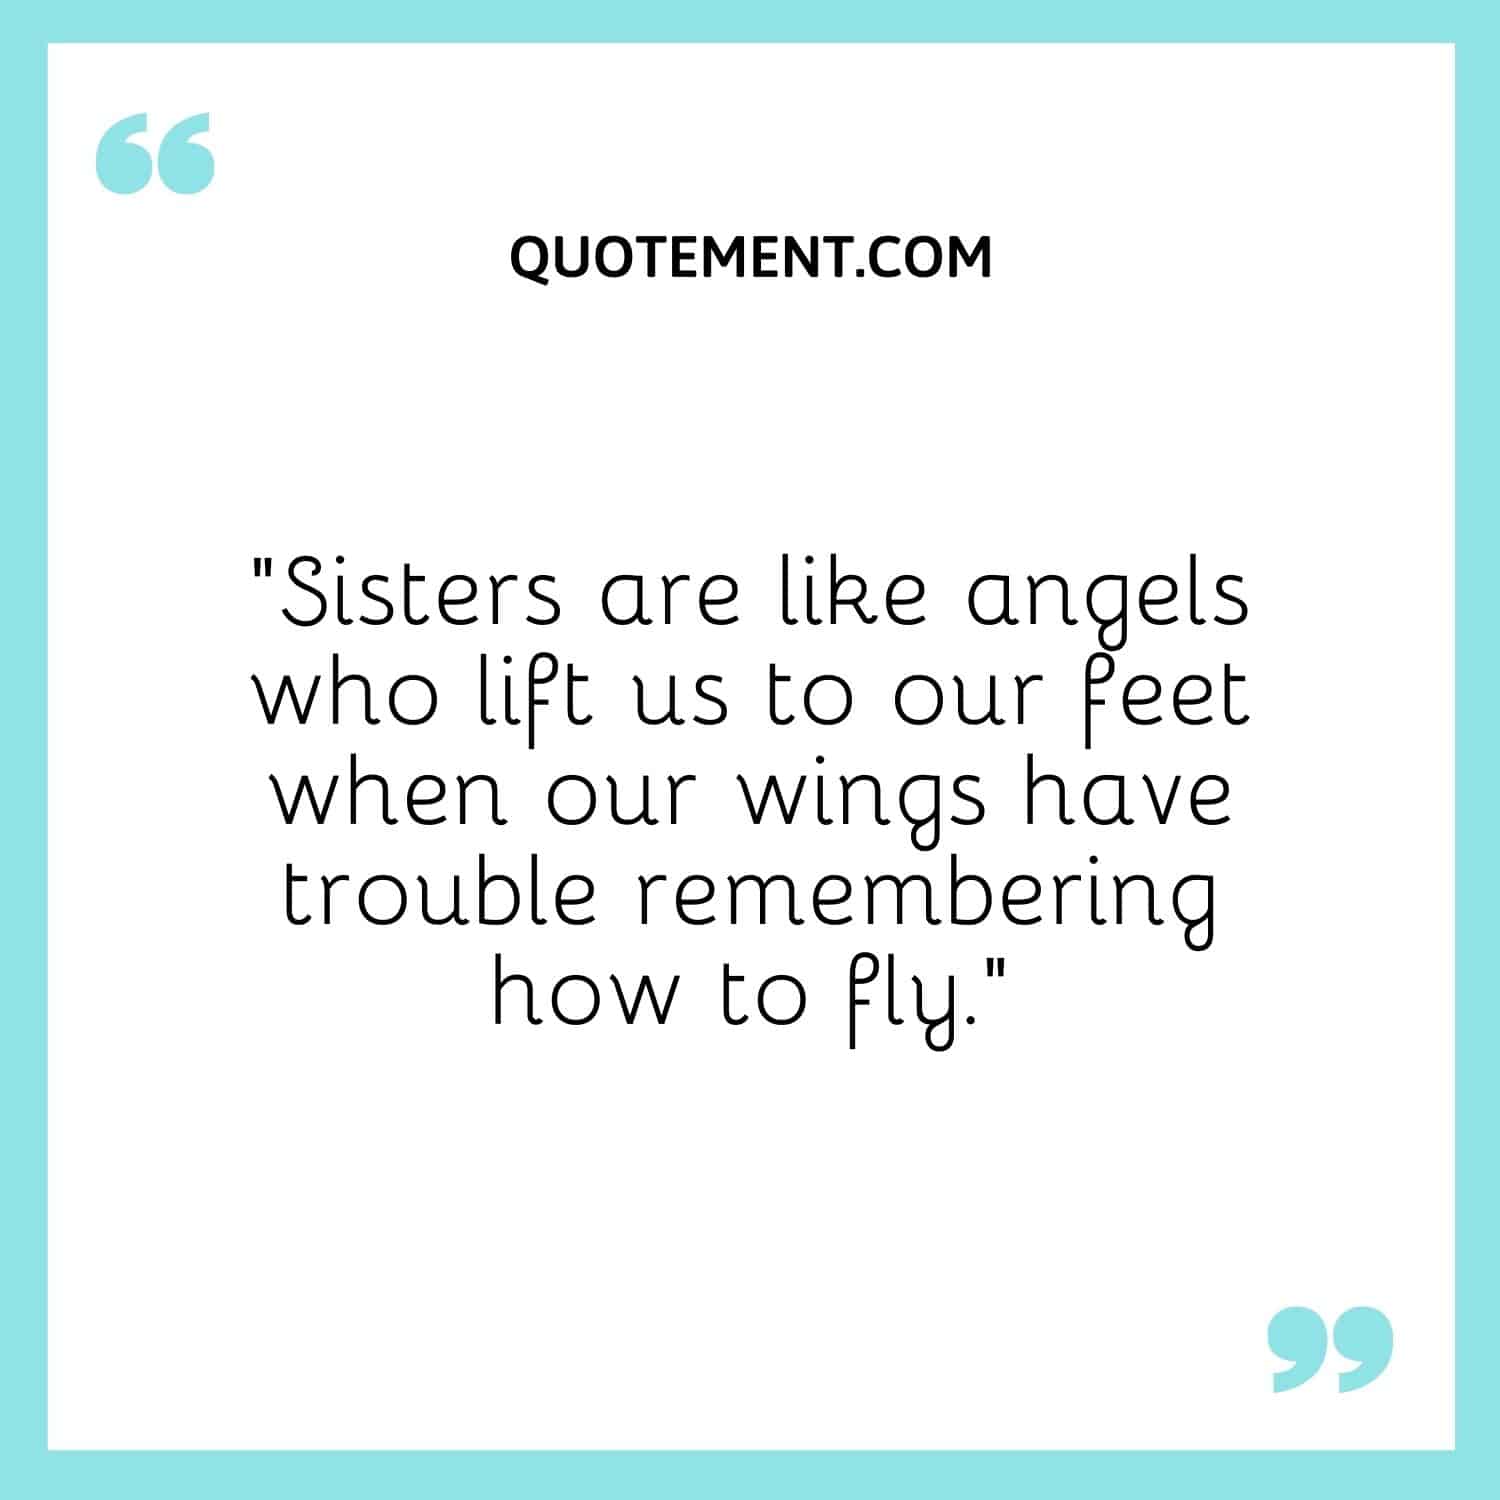 Sisters are like angels who lift us to our feet when our wings have trouble remembering how to fly.